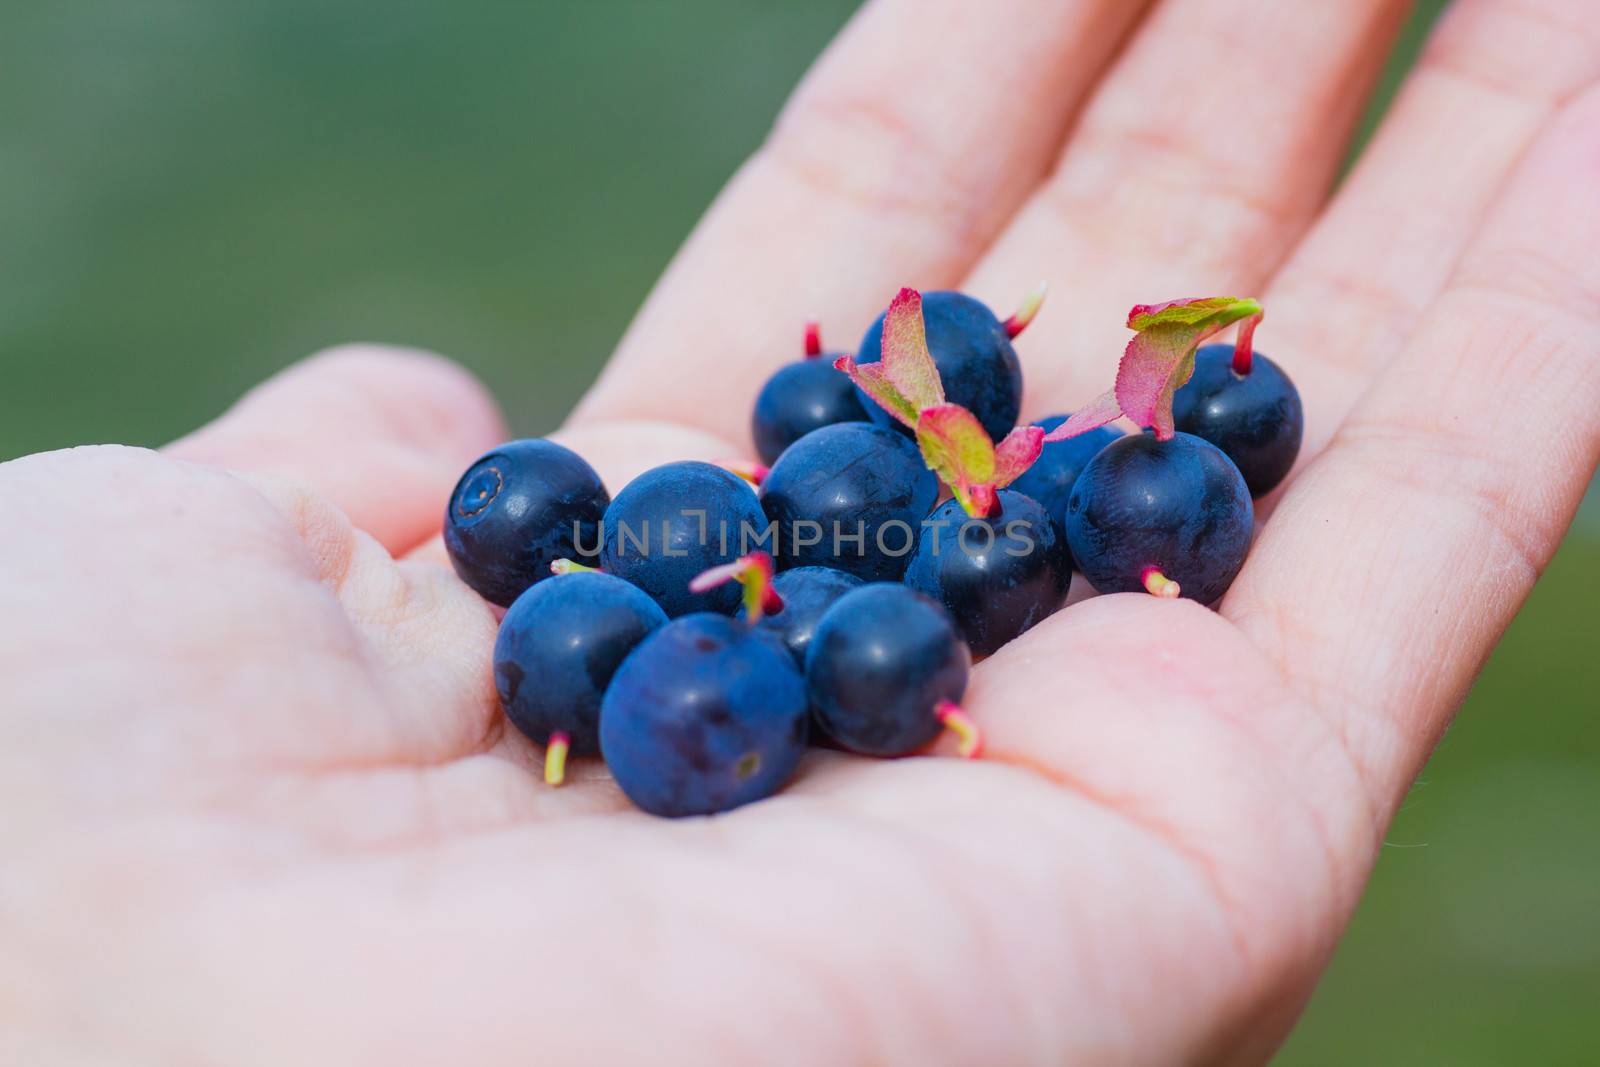 A Ripe Blueberry in Human Hand at the Summer Iceland